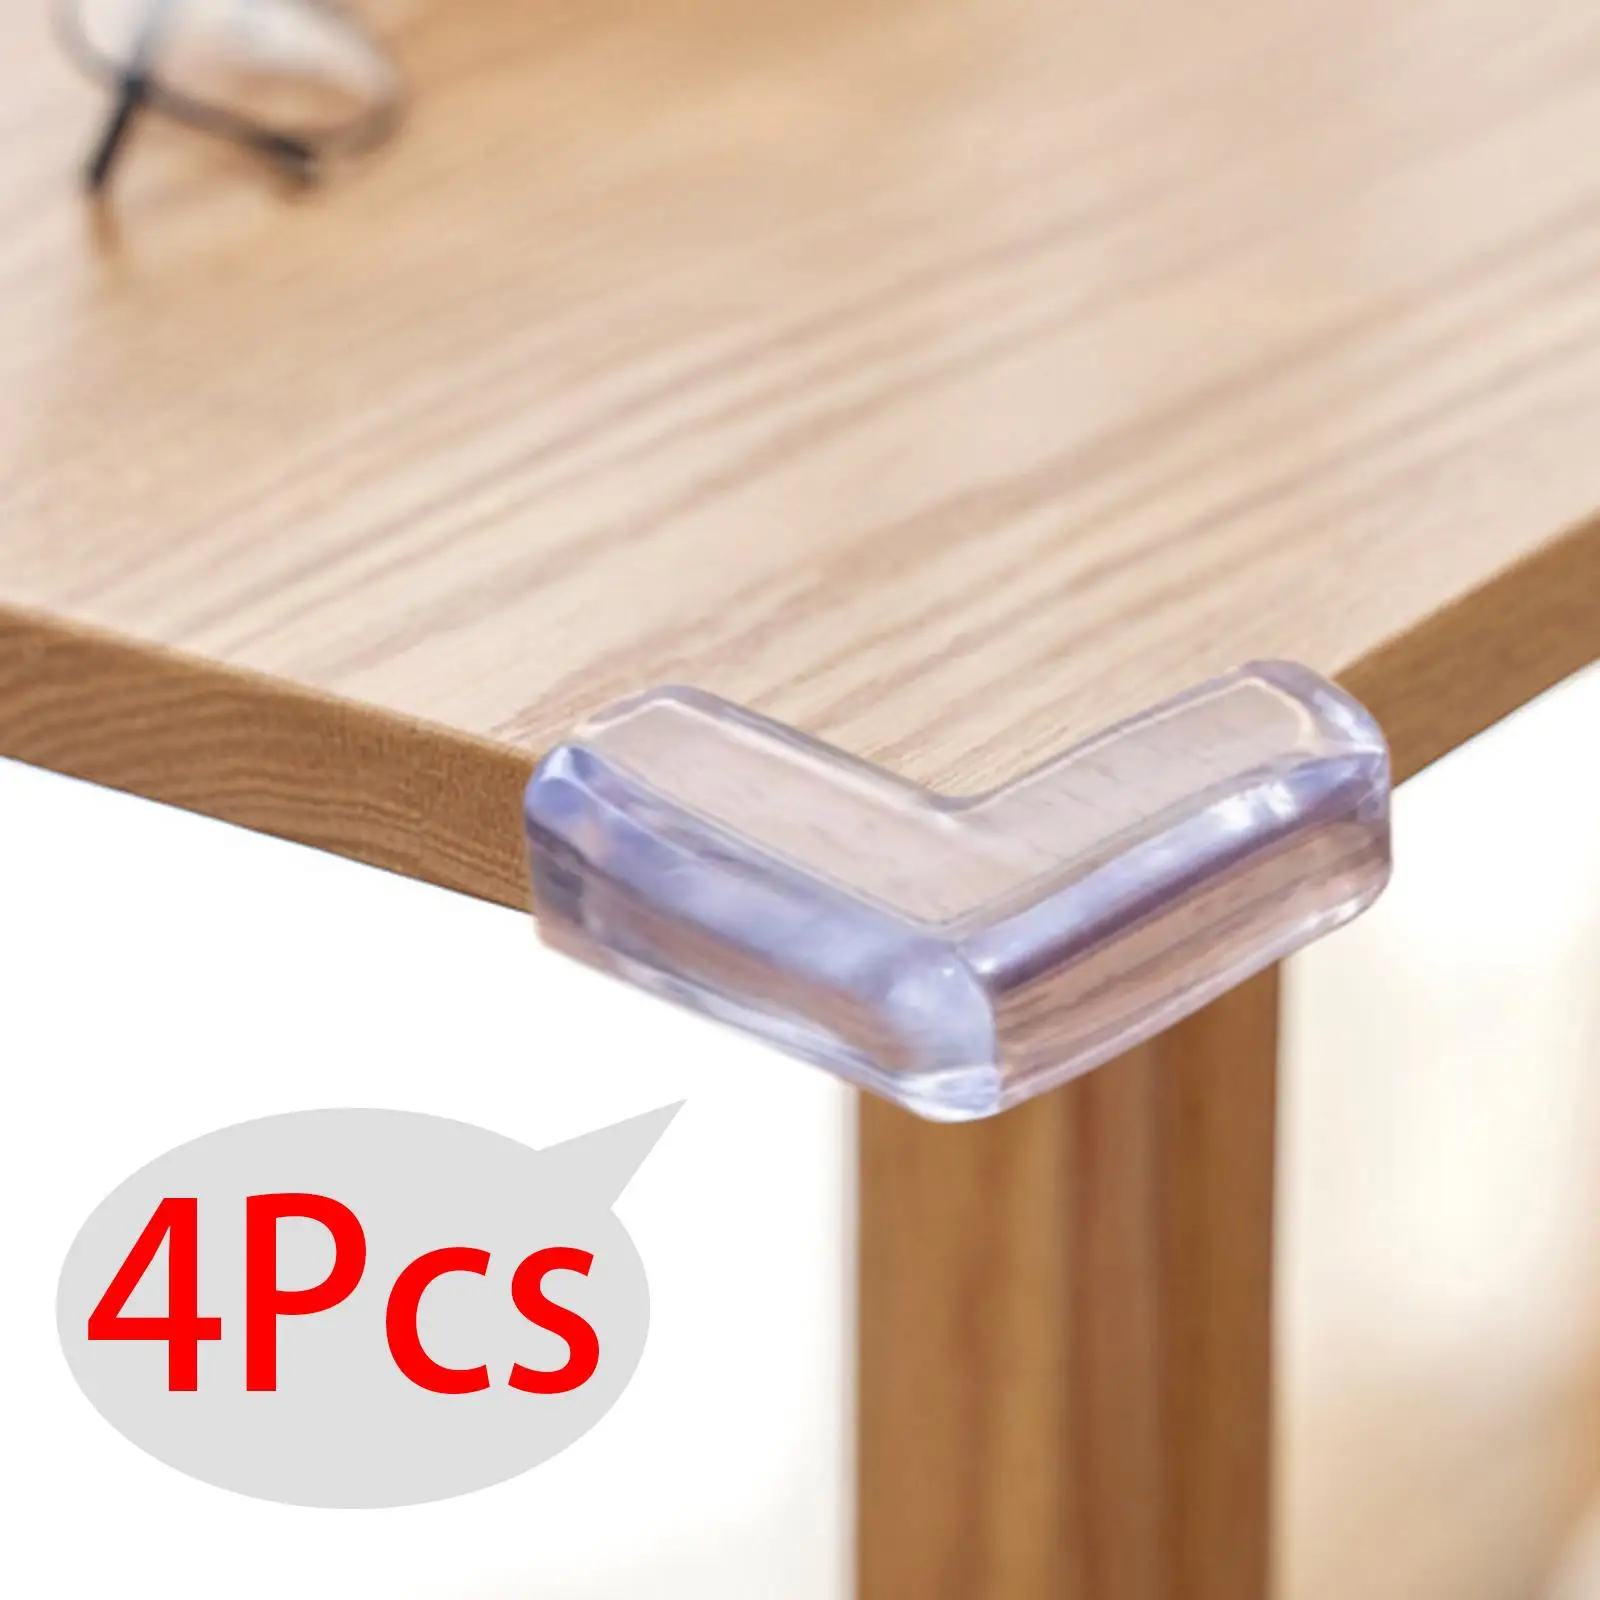 4Pcs Table Corner Protectors Baby Proofing Table Corner Edge Protection Cover for Furniture